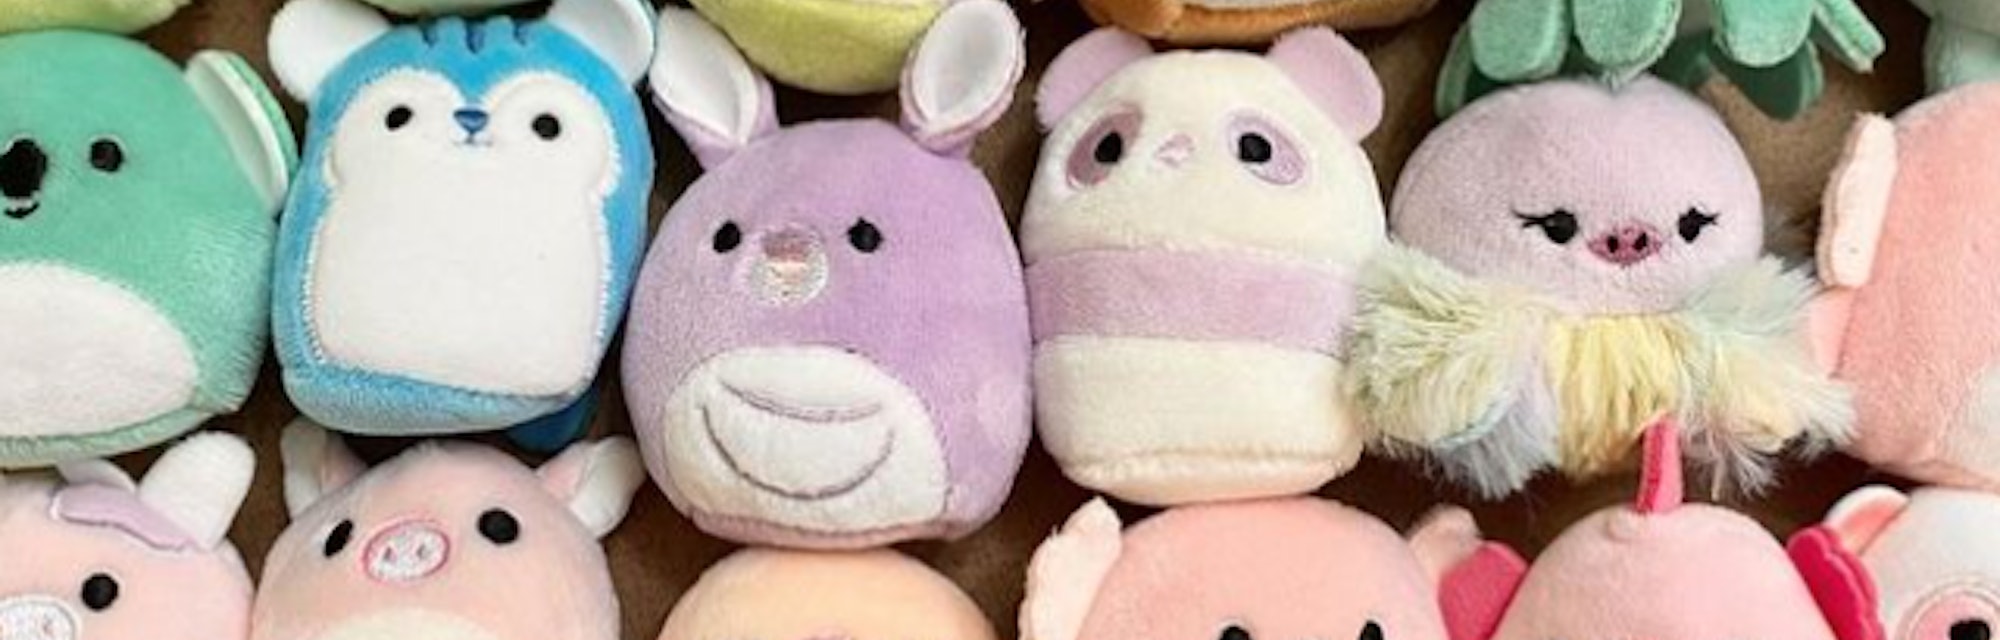 Rare Squishmallows can be hard to find and expensive, but certain versions are ridiculously popular.